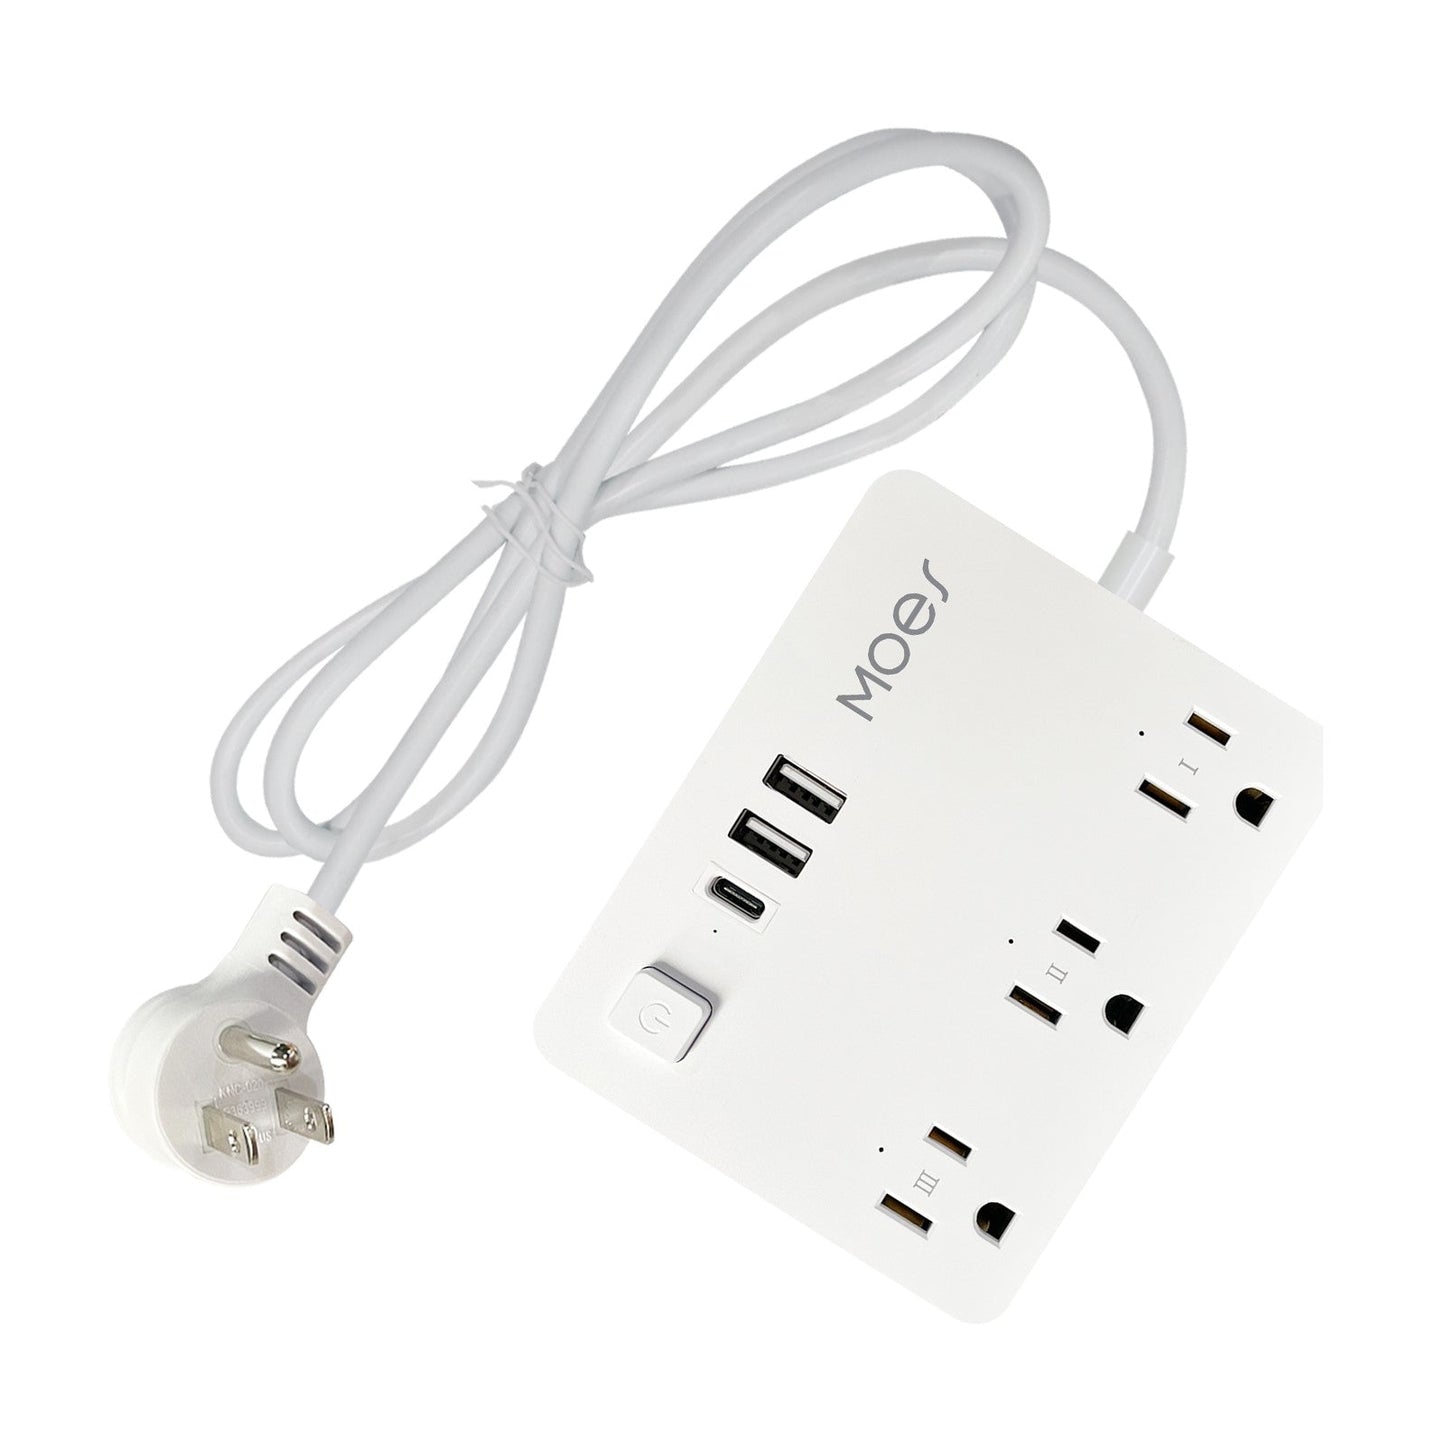 WiFi US Smart Power Strip Surge Protector 3 Plug Outlets Electric Socket with 2 USB Type C - Moes